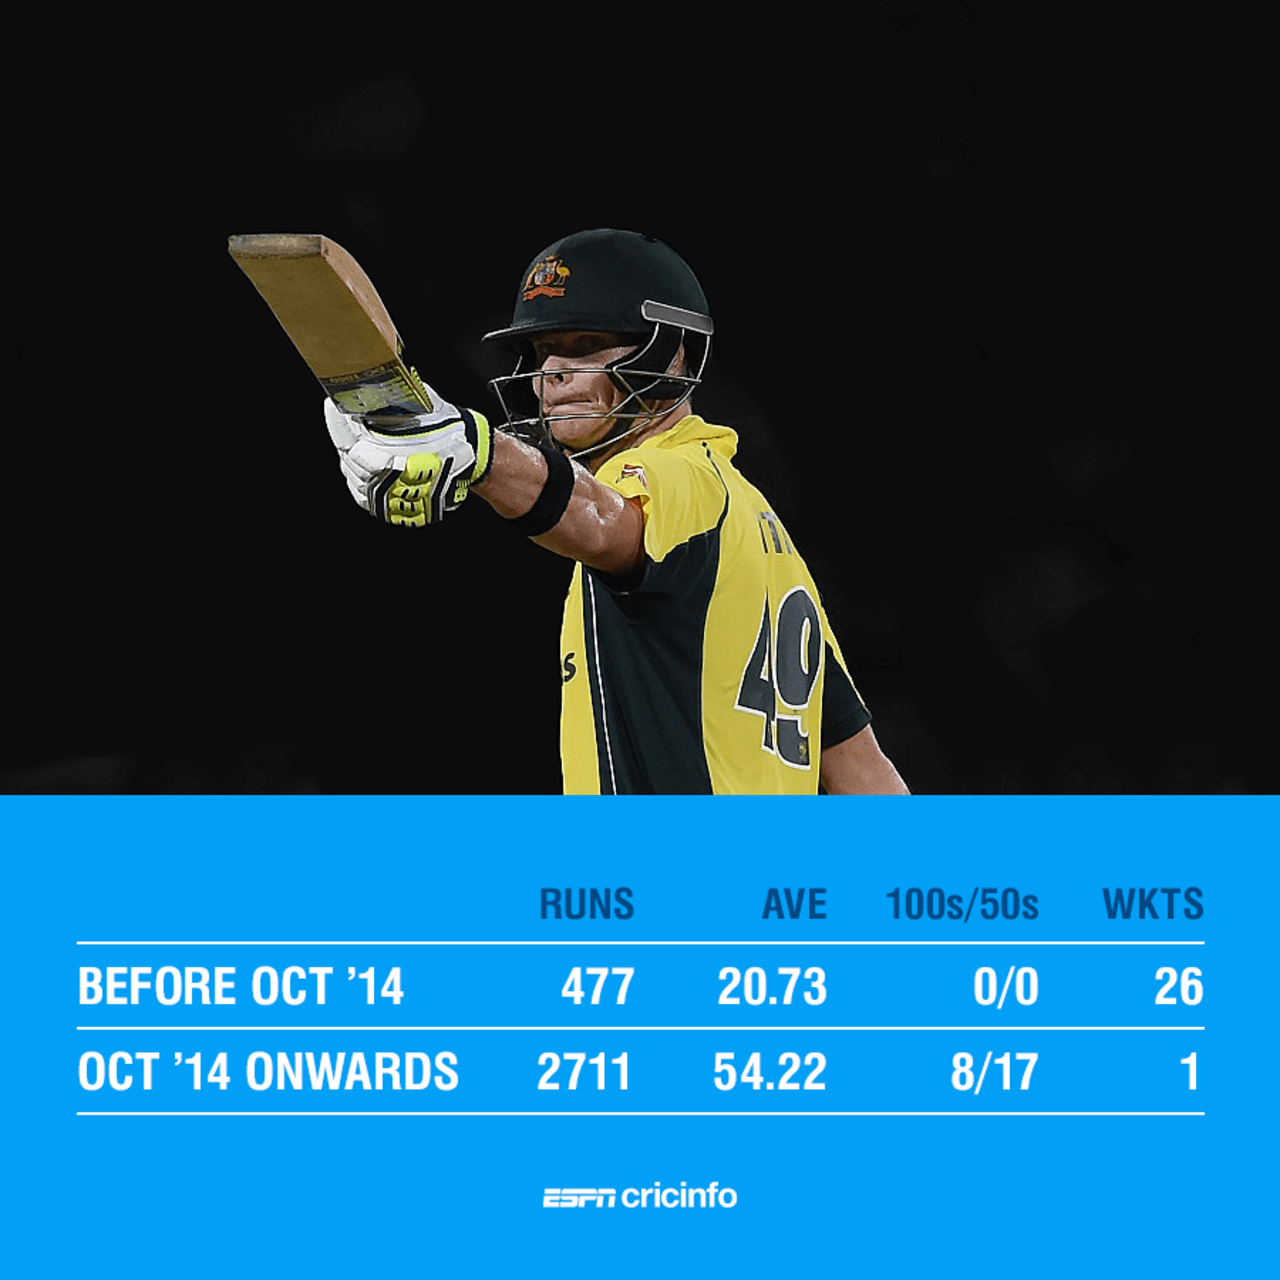 Smith's career batting numbers have skyrocketed since September 2014